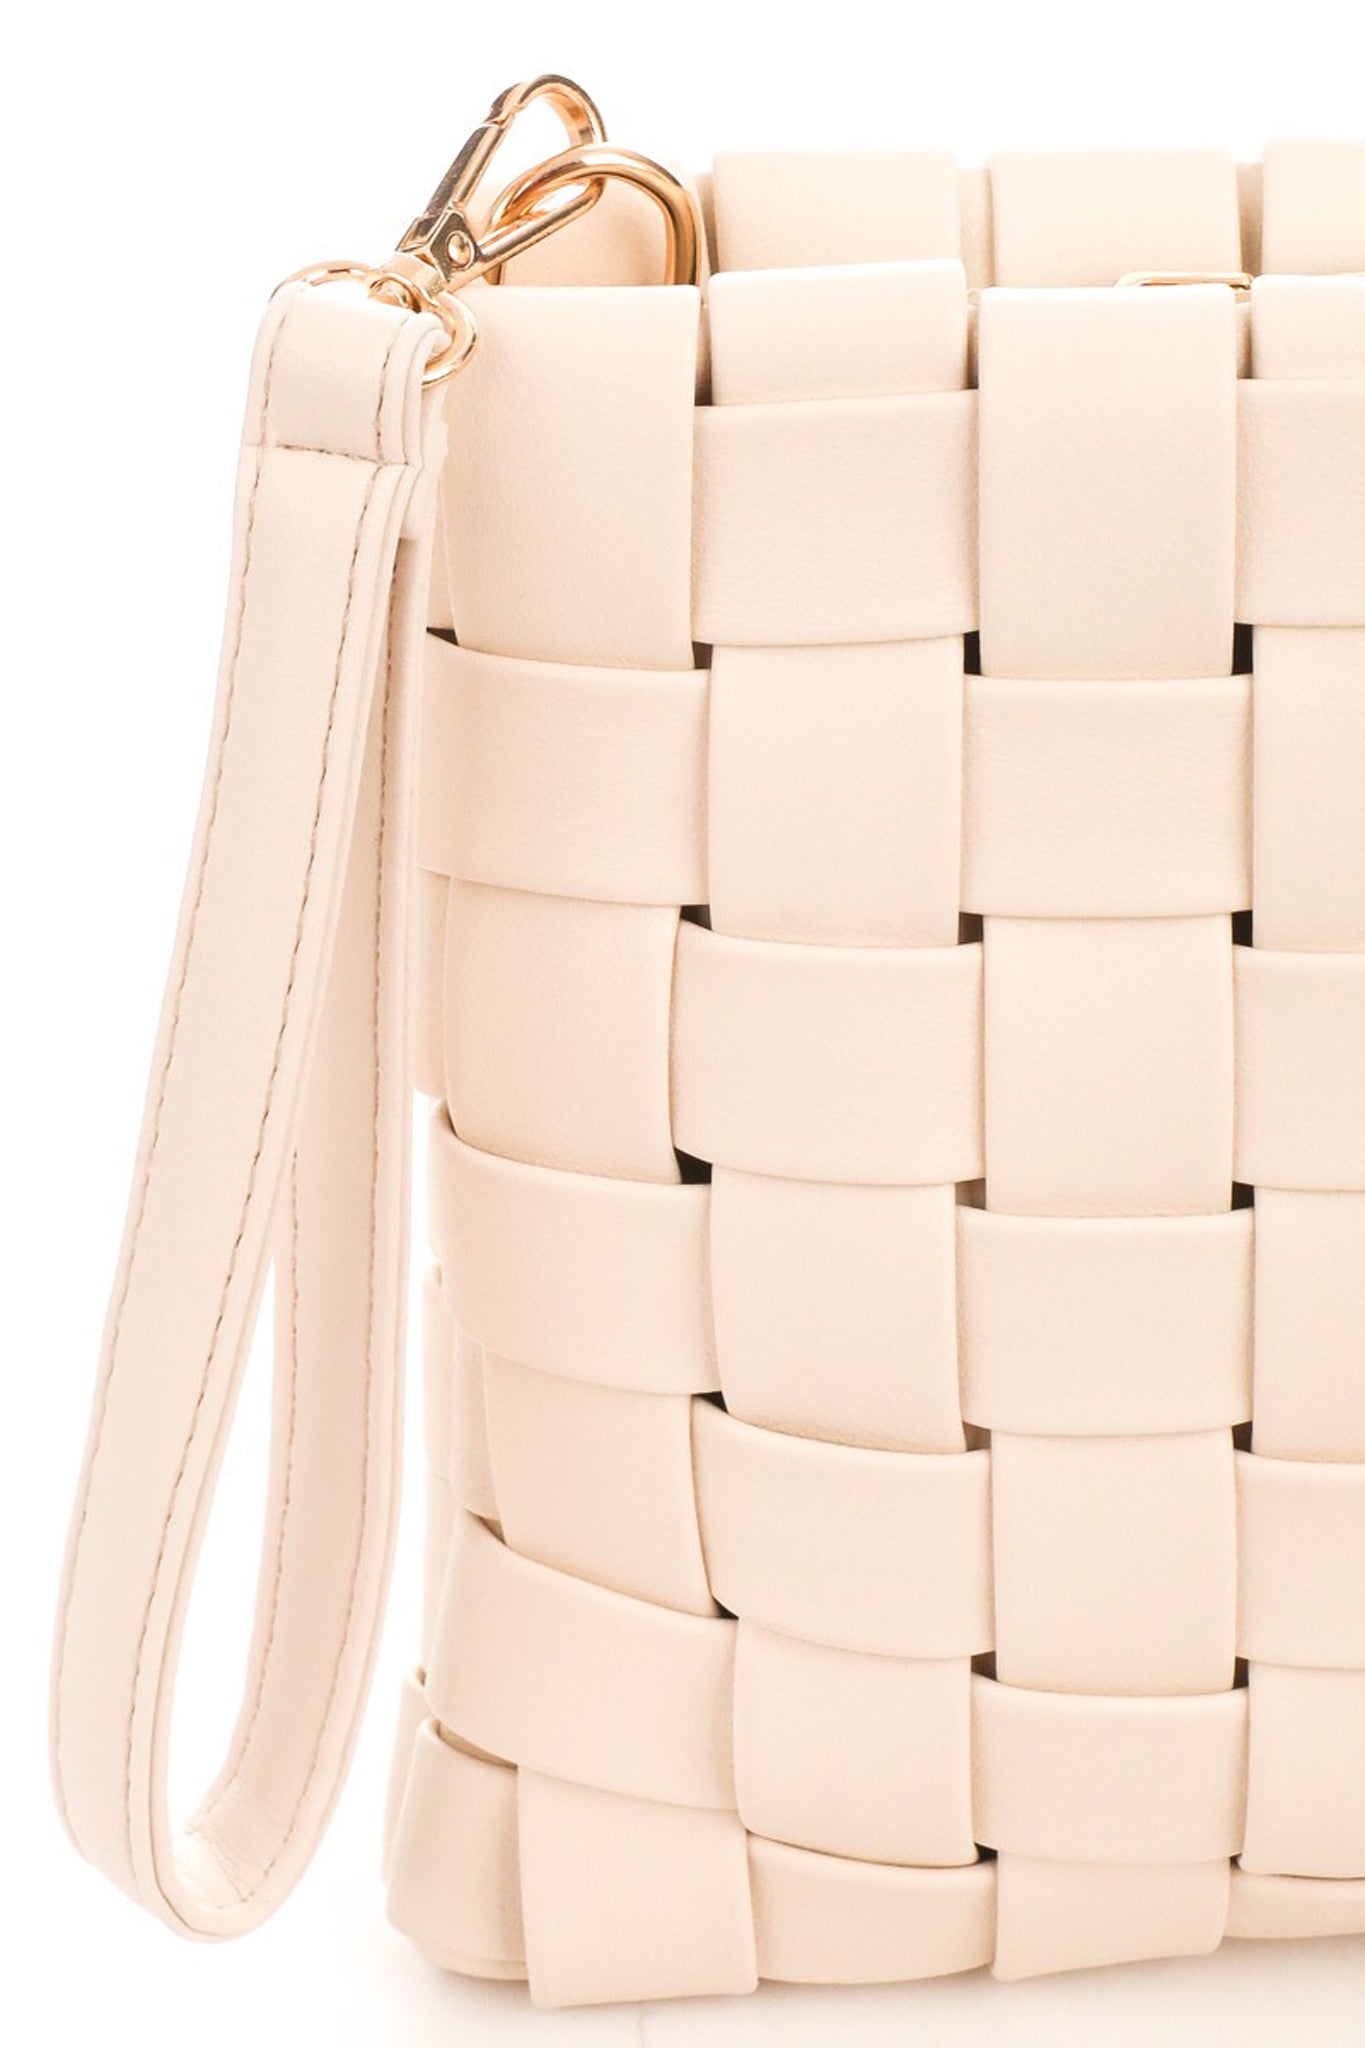 View 6 of Keen Woven Clutch in Ivory, a Bags from Larrea Cove. Detail: .